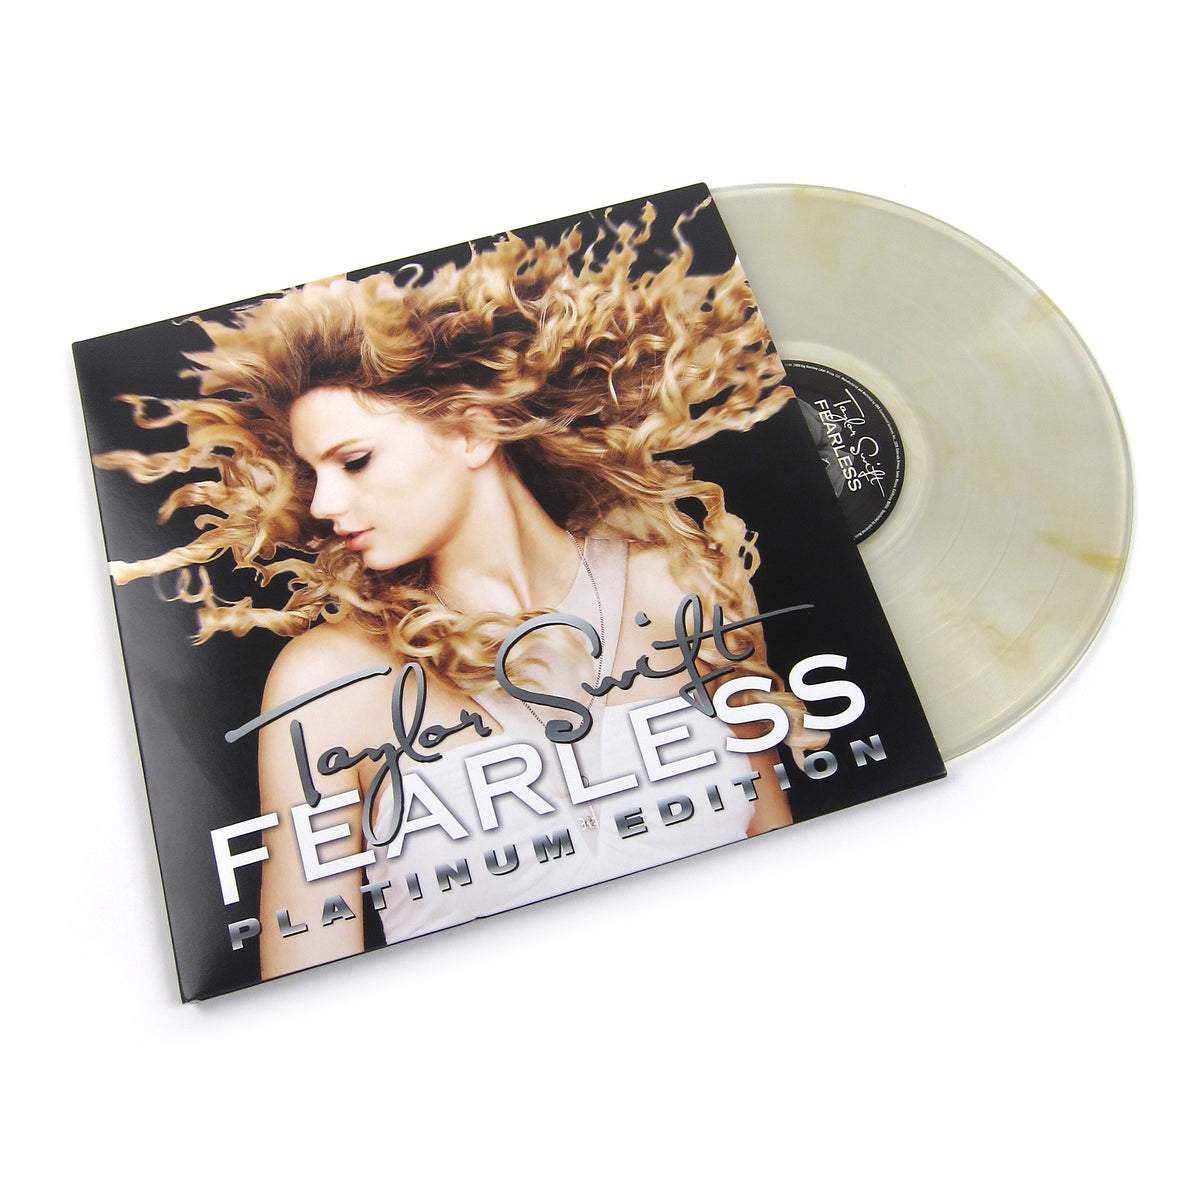 TAYLOR SWIFT – FEARLESS VINILO 2LP PLATINUM EDITION – Musicland Chile